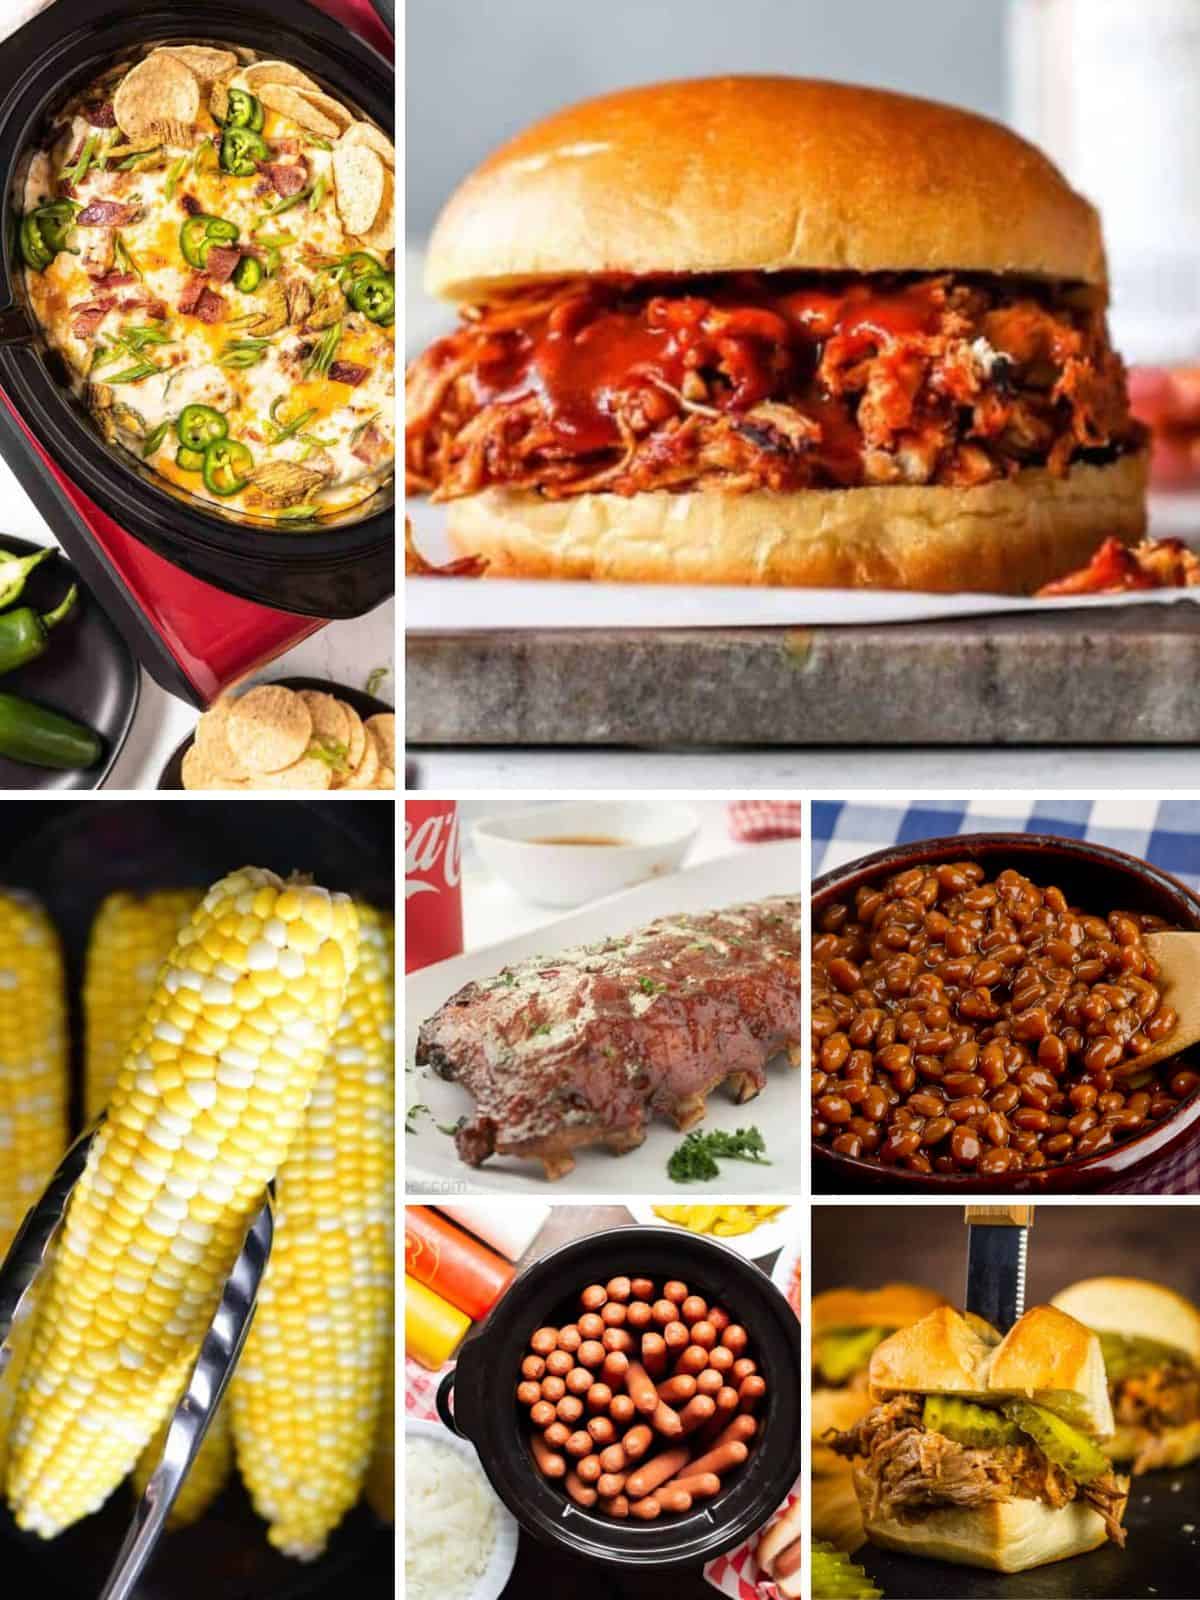 A collection of recipes made in the crock pot perfect for summer entertaining.